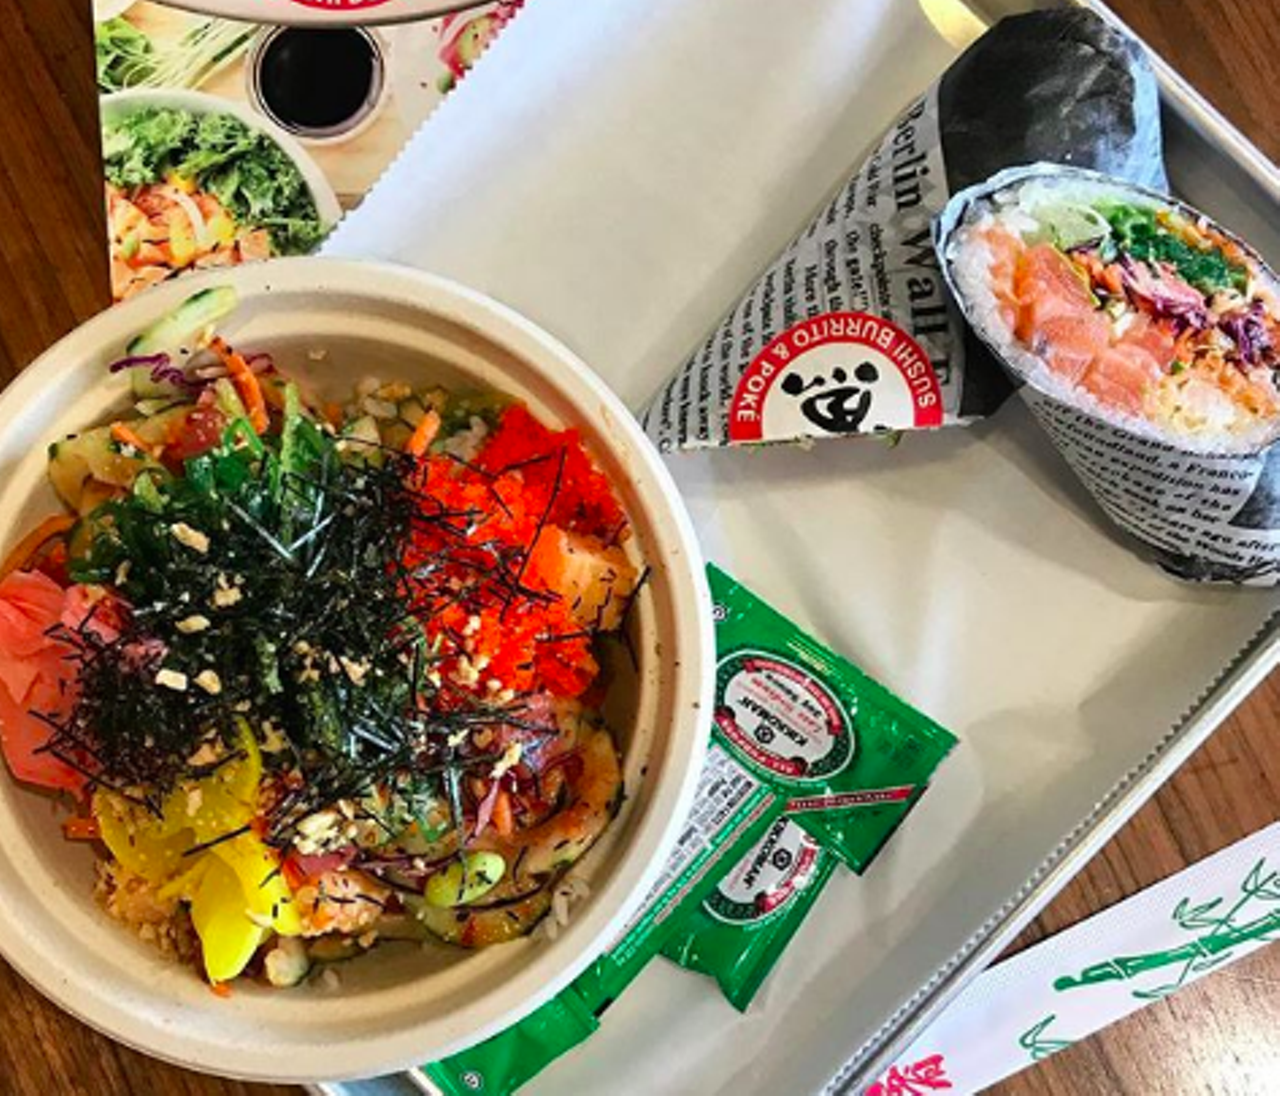 Hula Poke
11830 Bandera Rd, (210) 592-1003, facebook.com
Hula Poke opened its third location, this time nestled on Bandera Road in Helotes. This growing chain is best known for its DIY poke bowls.
Photo via Instagram / milkbutterandeggs